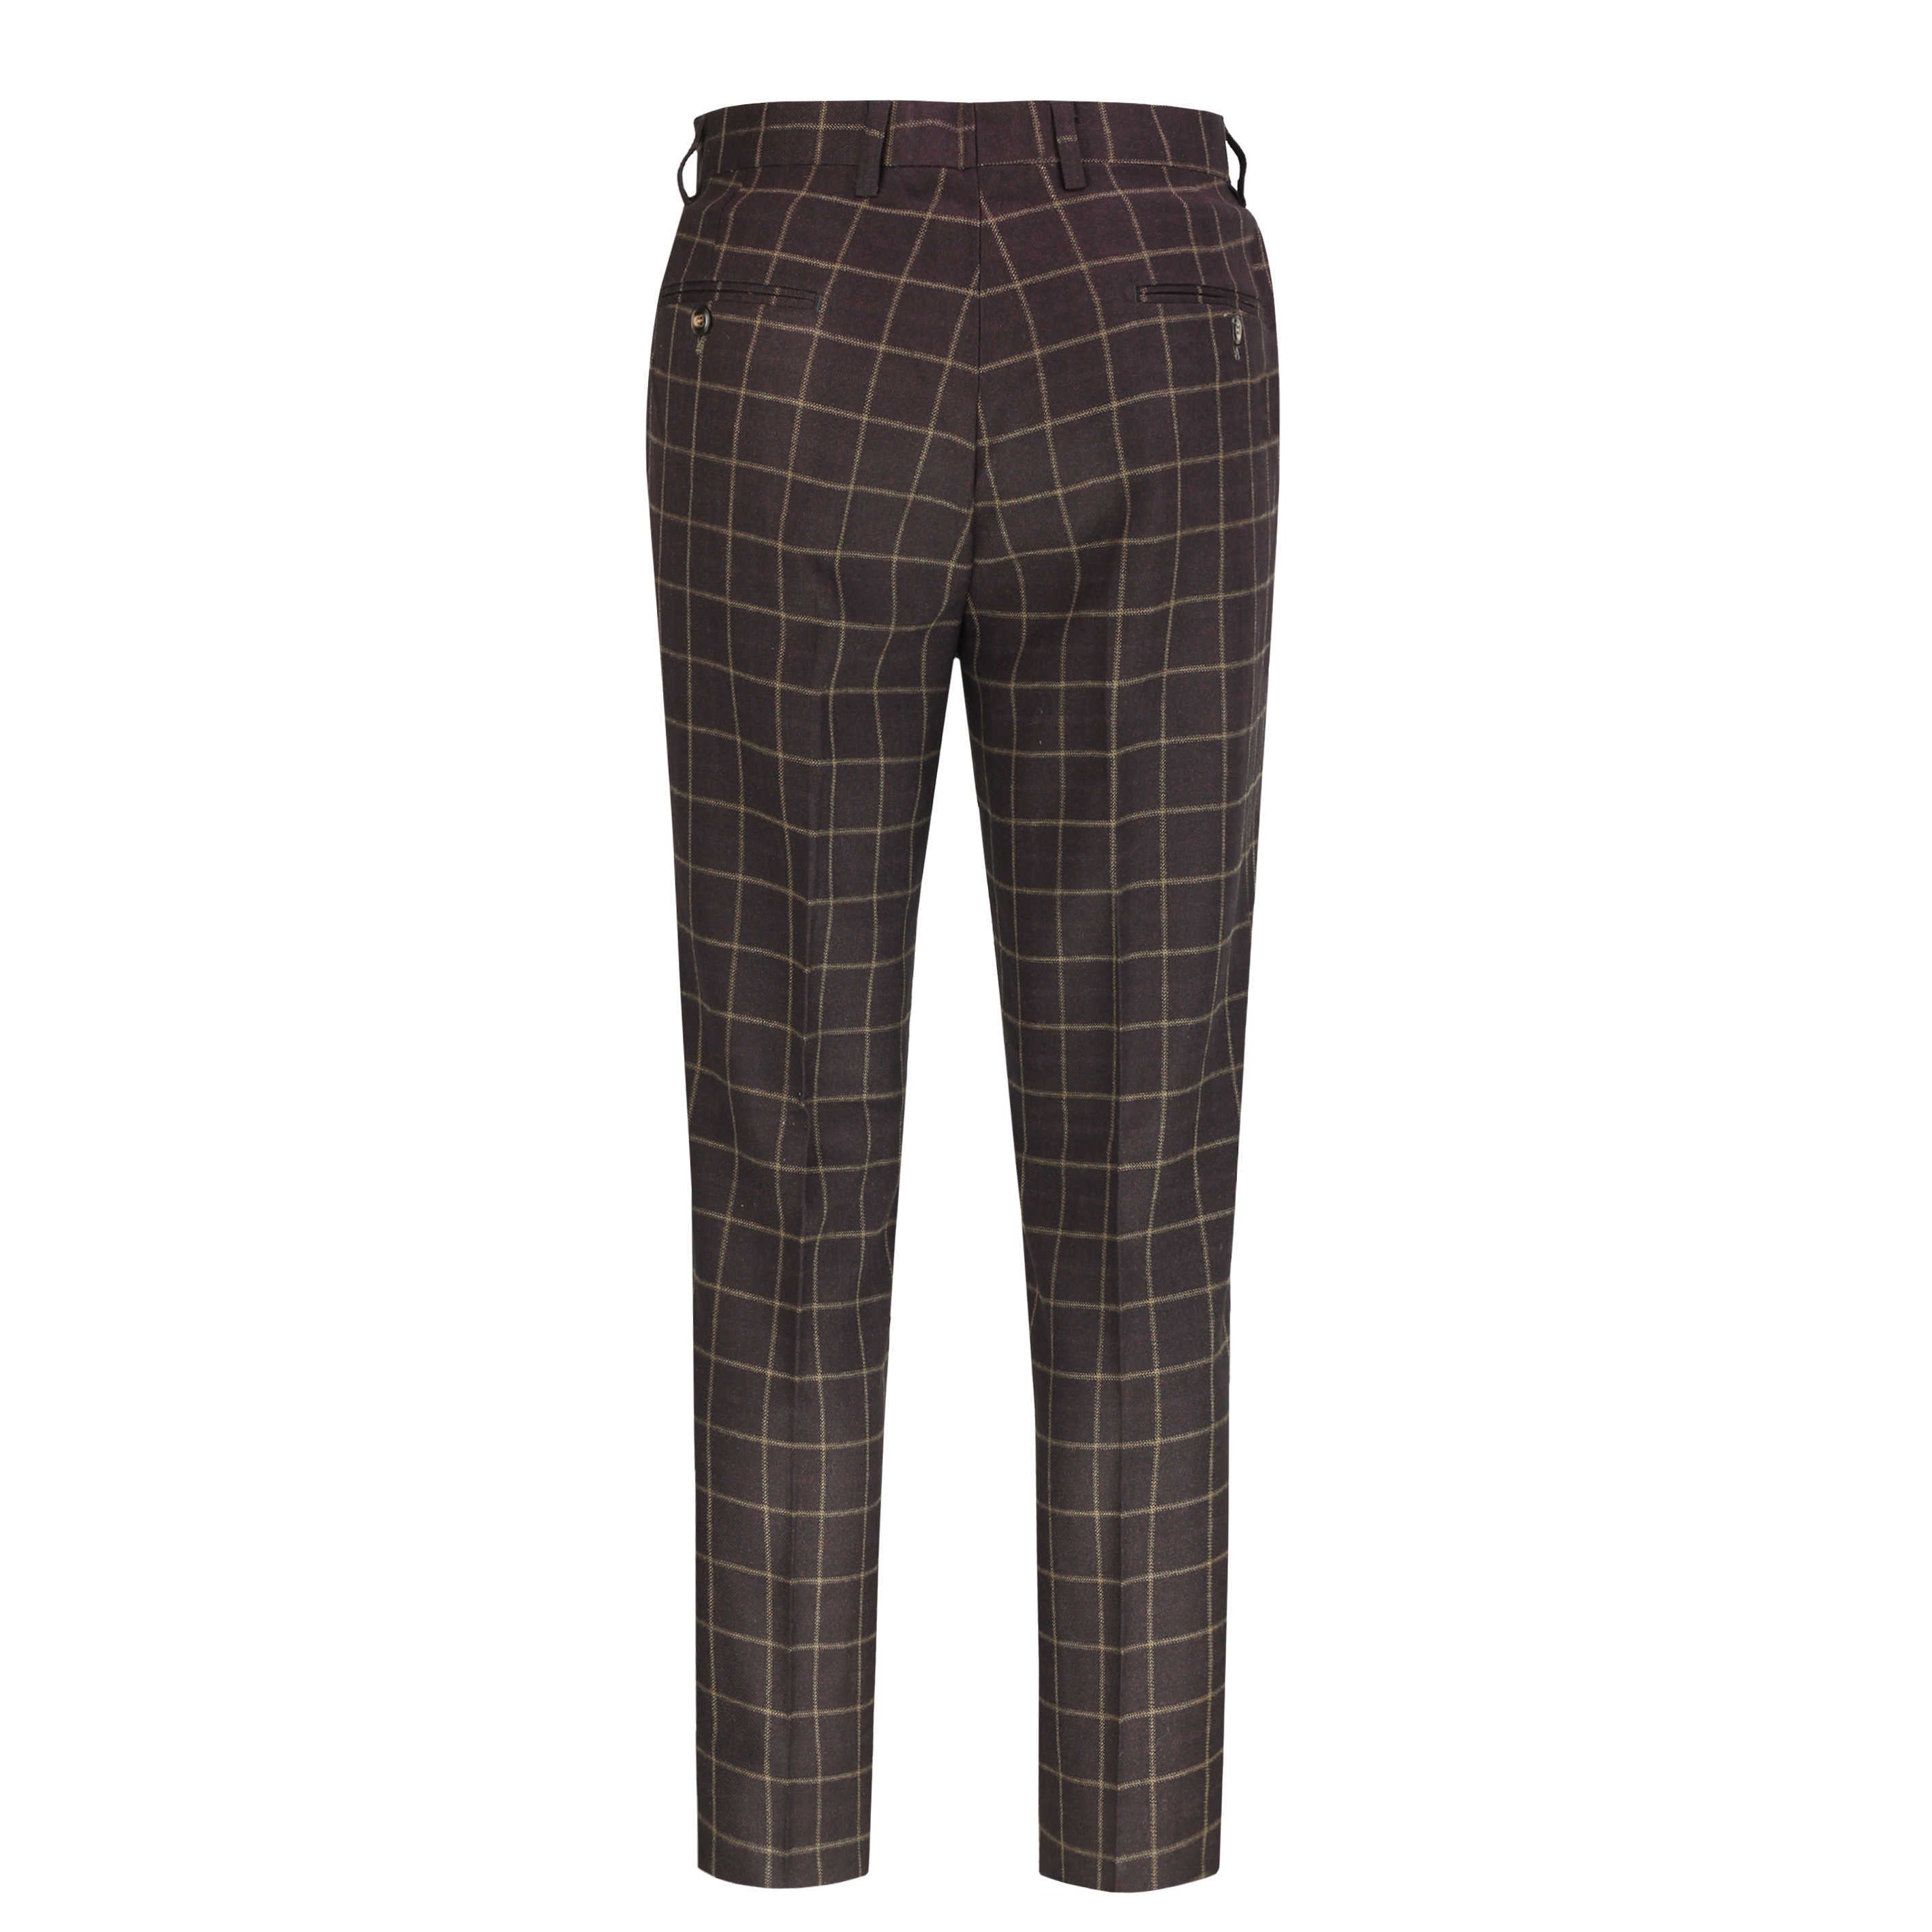 Mens Brown Windowpane Check Trousers Retro Vintage Slim Tailored Fit Suit Pants